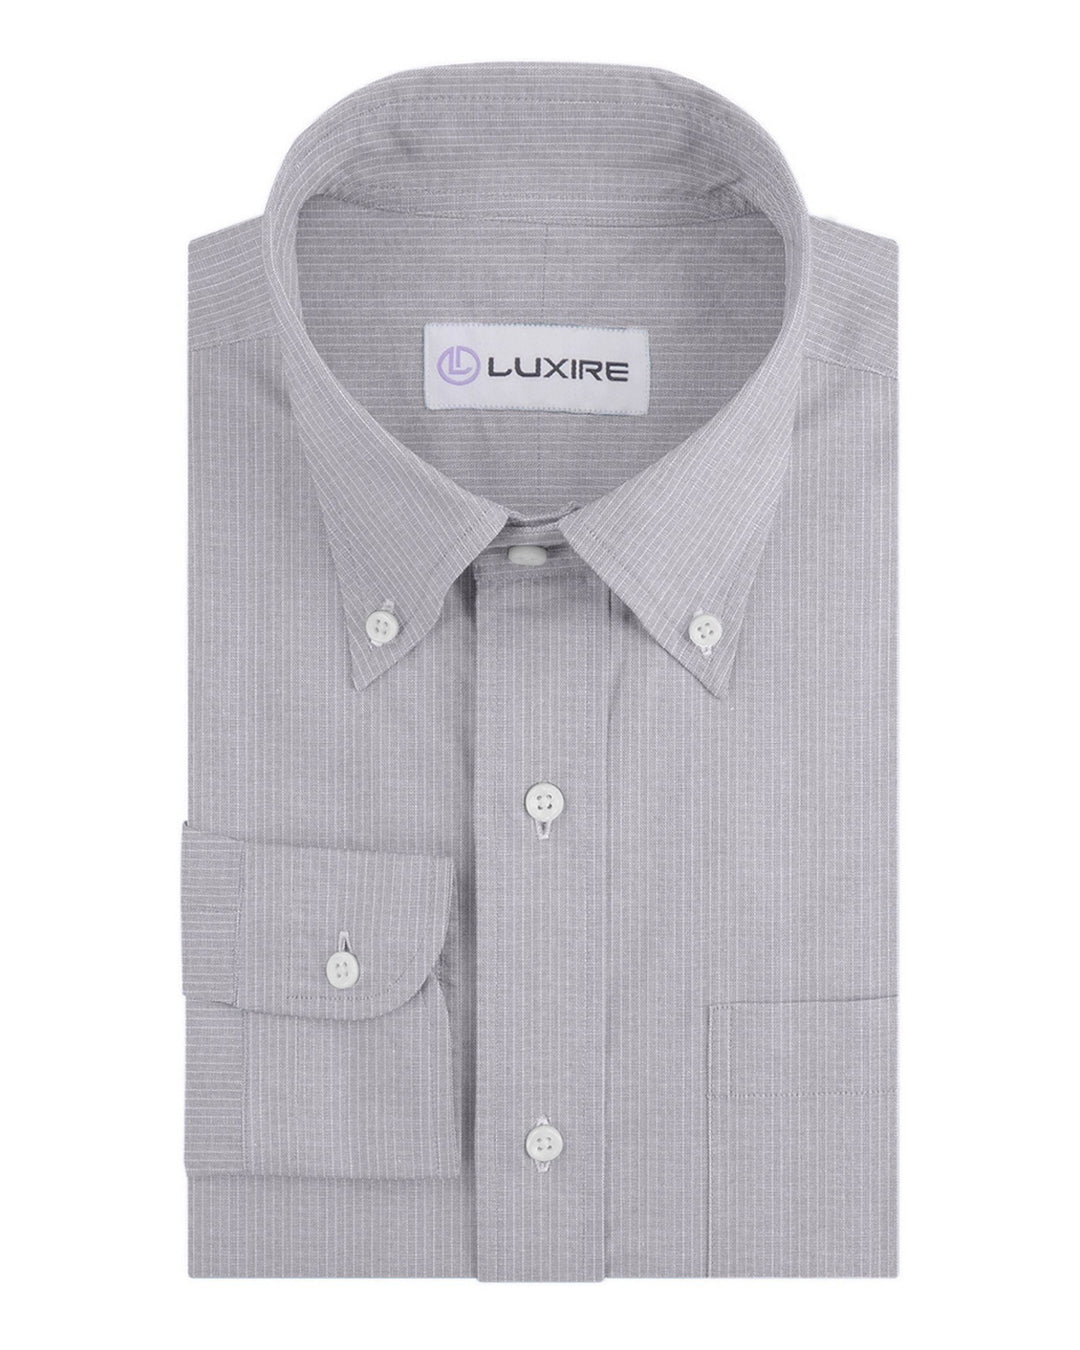 Front of the custom linen shirt for men in grey with thin white stripes by Luxire Clothing